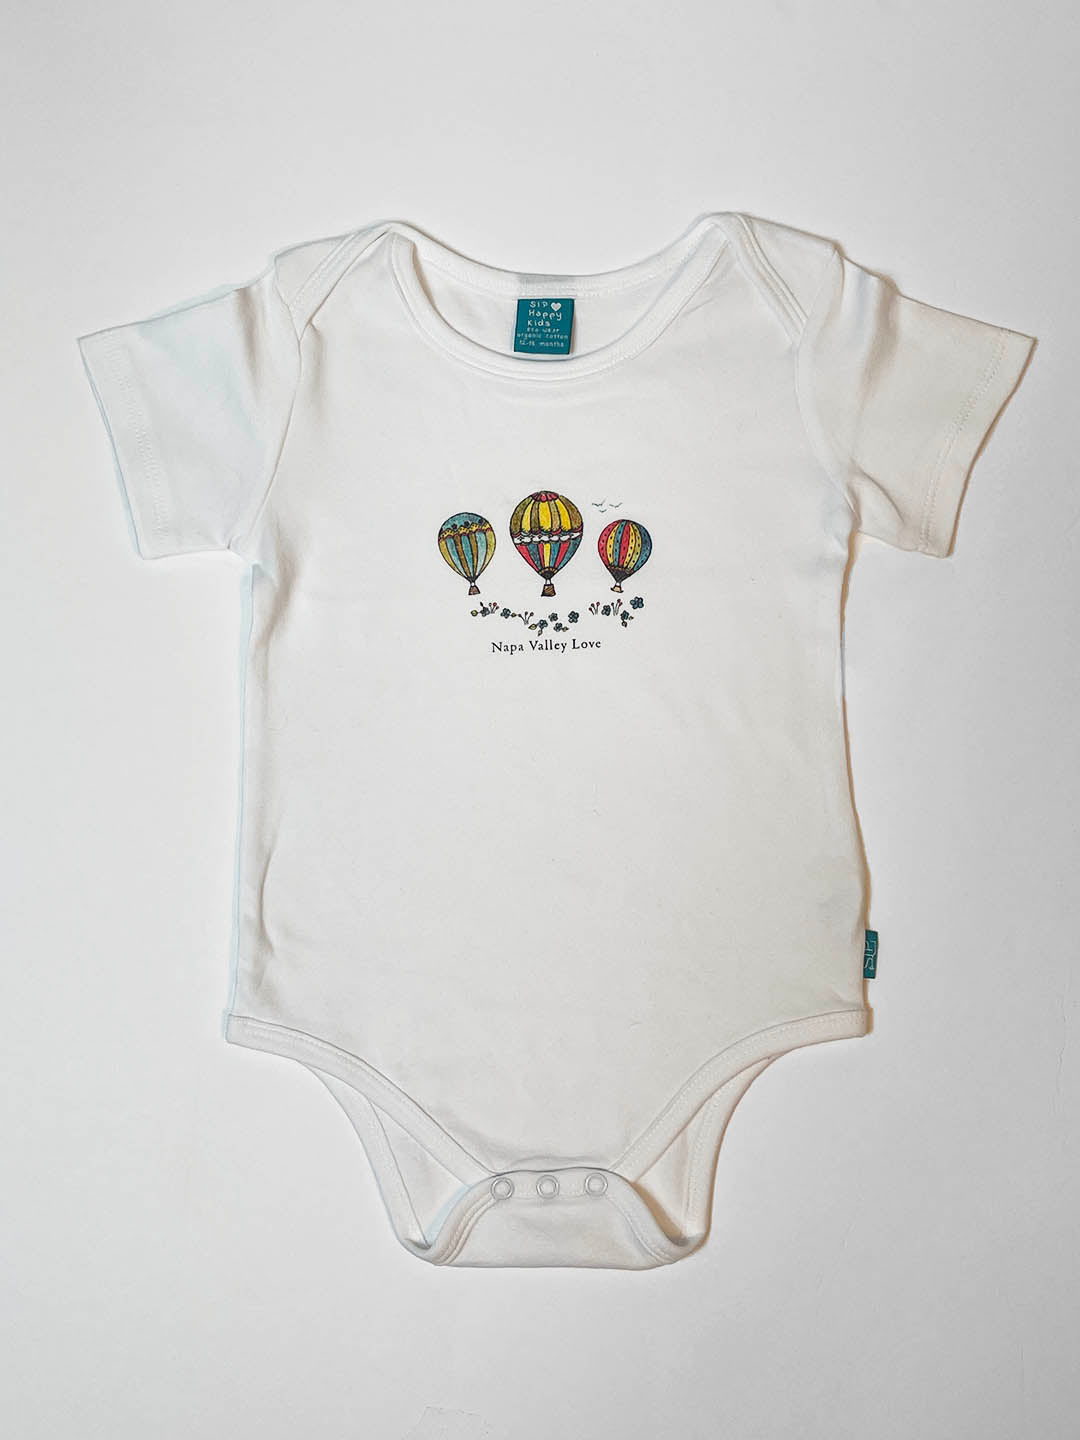 "Up, Up, and Away" Onesies